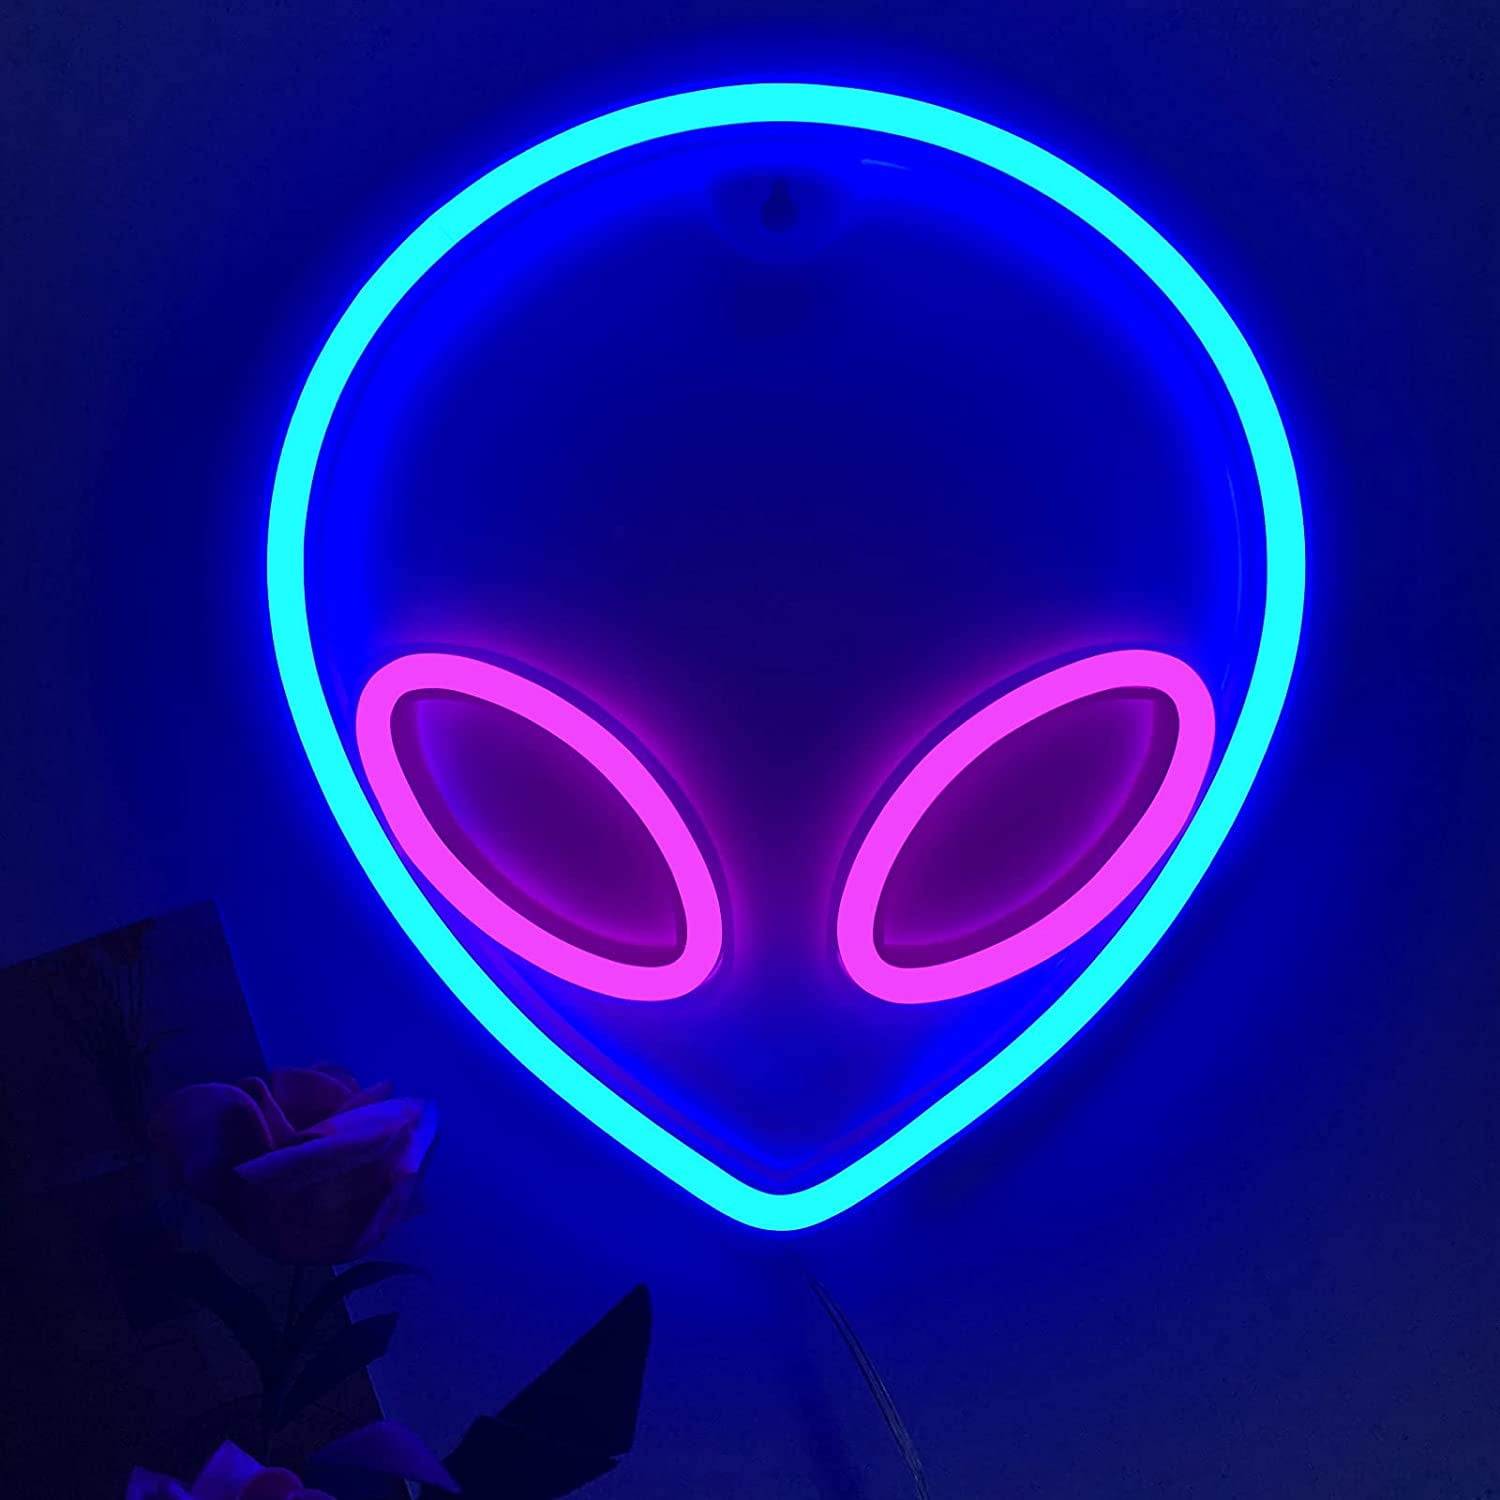 DUDIU Alien Neon Signs for Bedroom Wall Decor Battery and USB Powered Blue Pink Alien Neon Sign Light up for Home Kids Room Children‘s Day Bar Festival Birthday Christmas Halloween Party